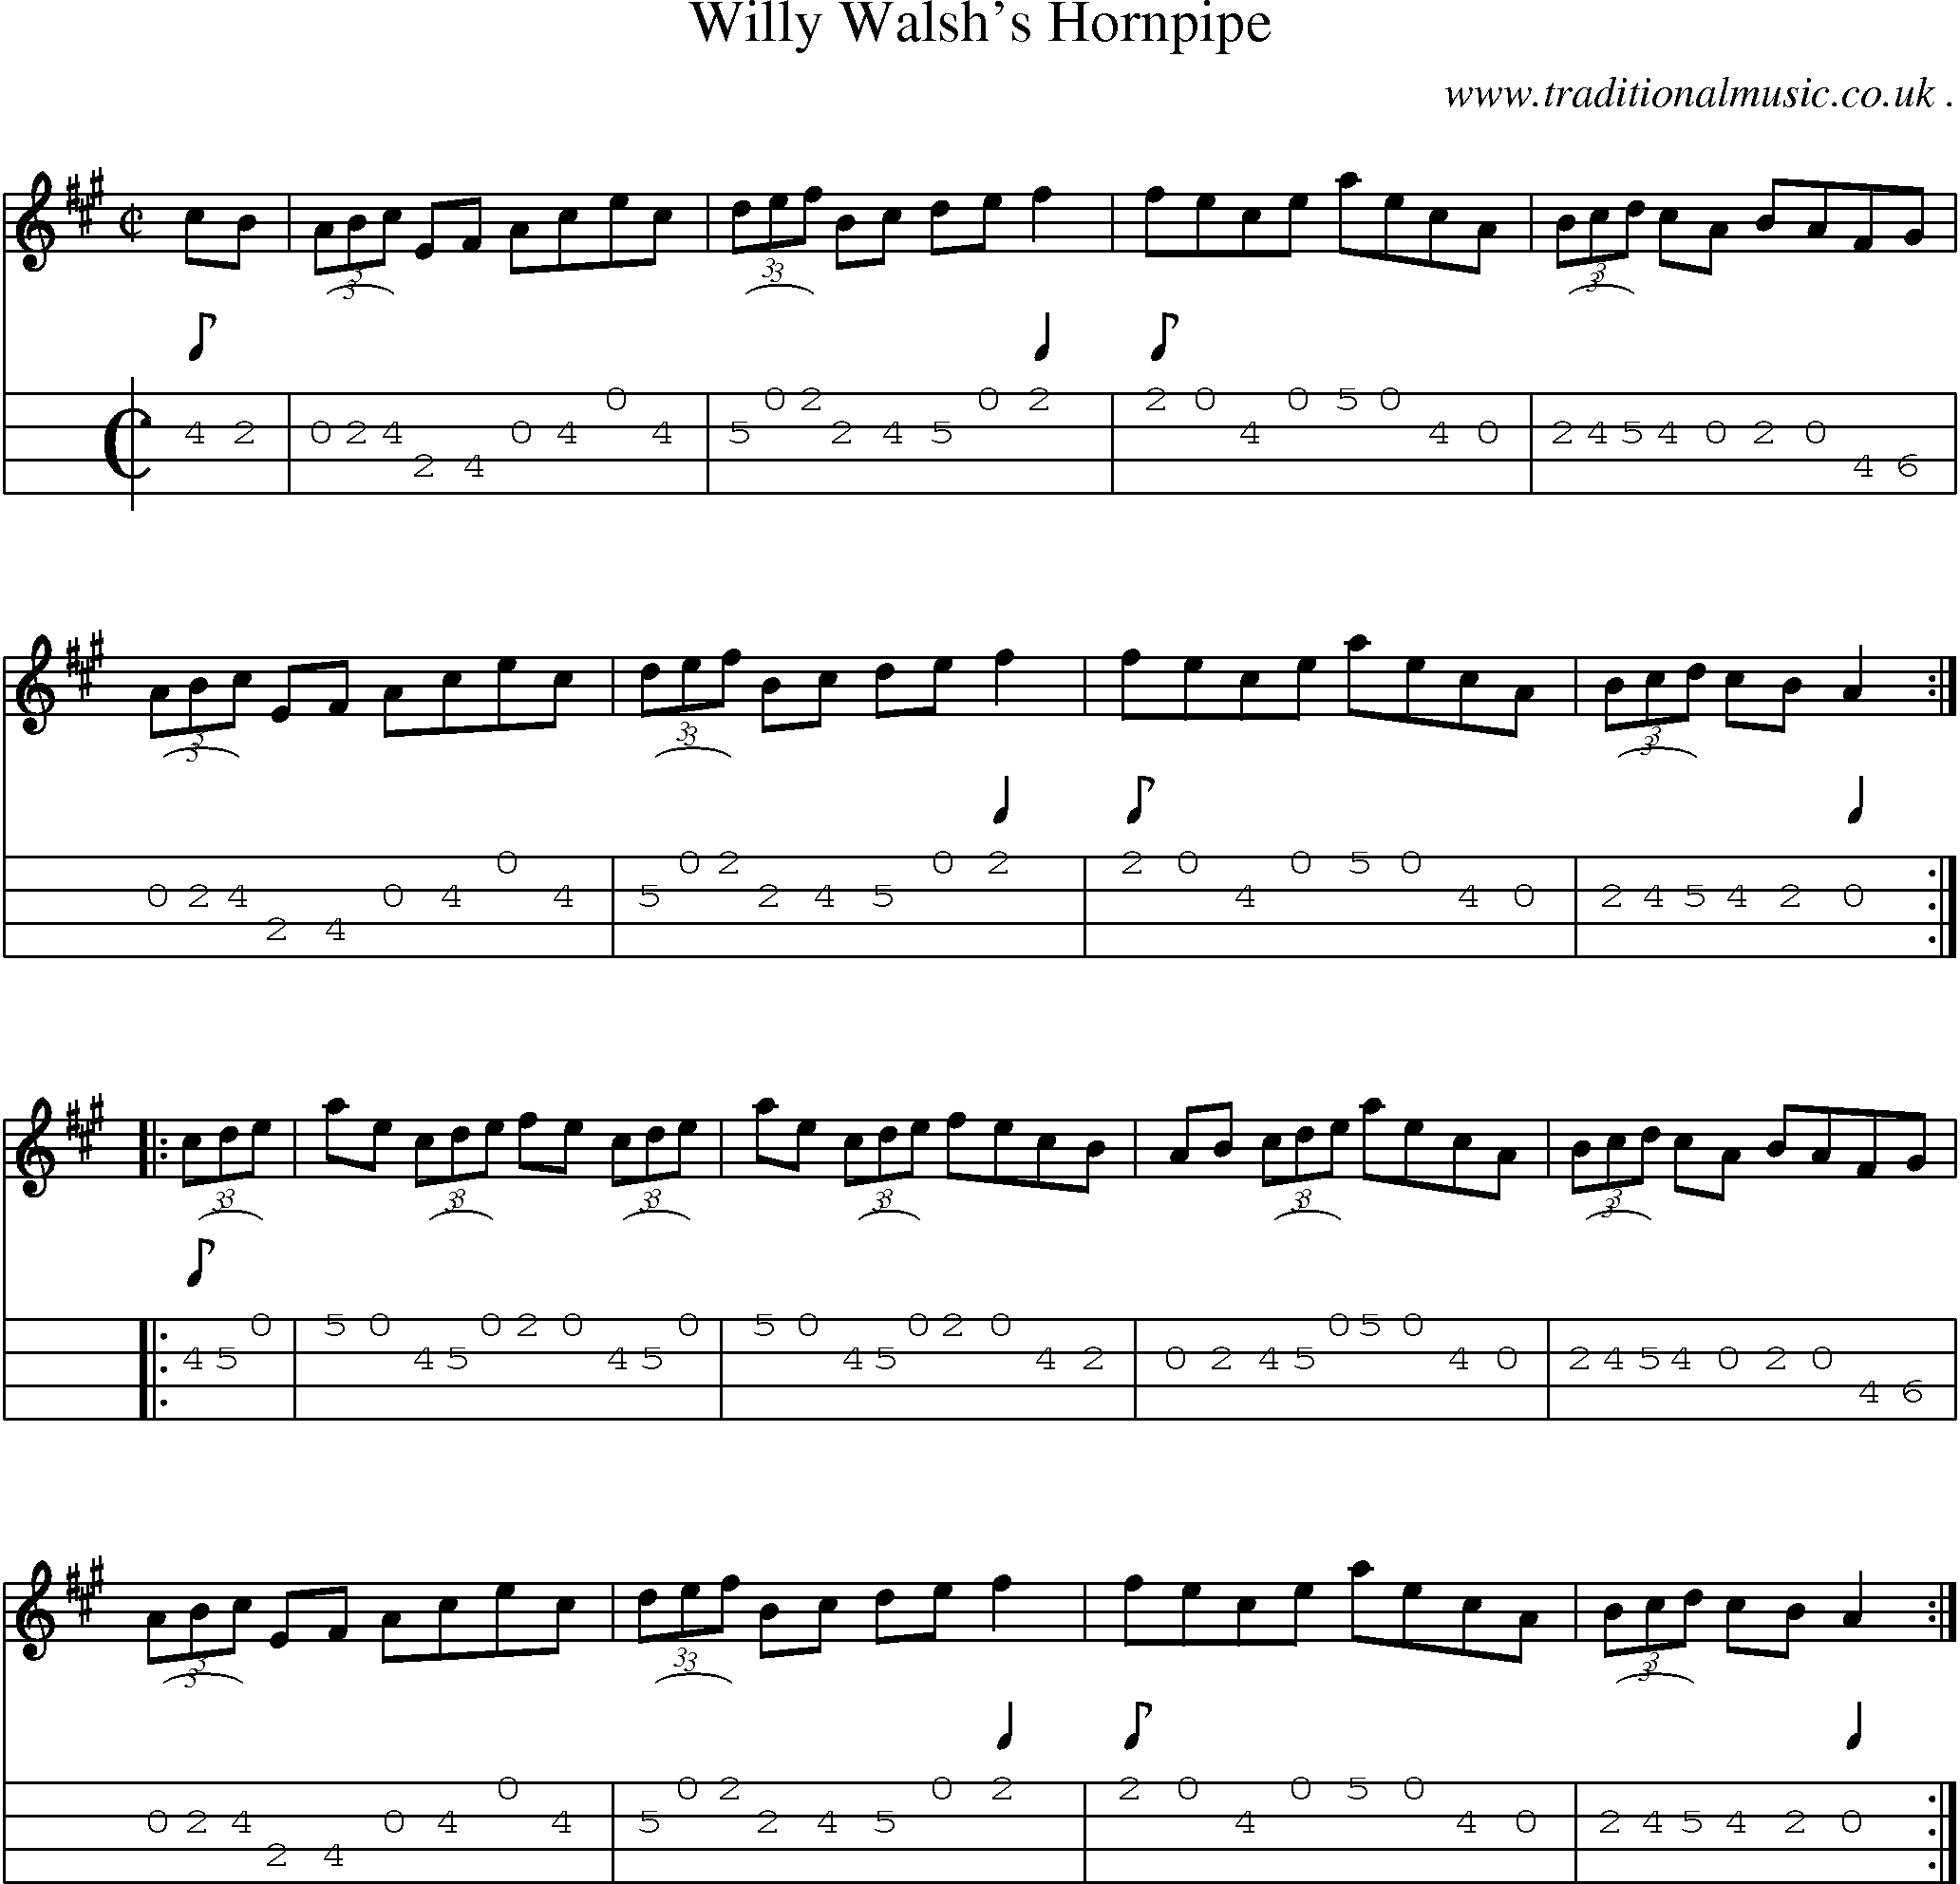 Sheet-Music and Mandolin Tabs for Willy Walshs Hornpipe